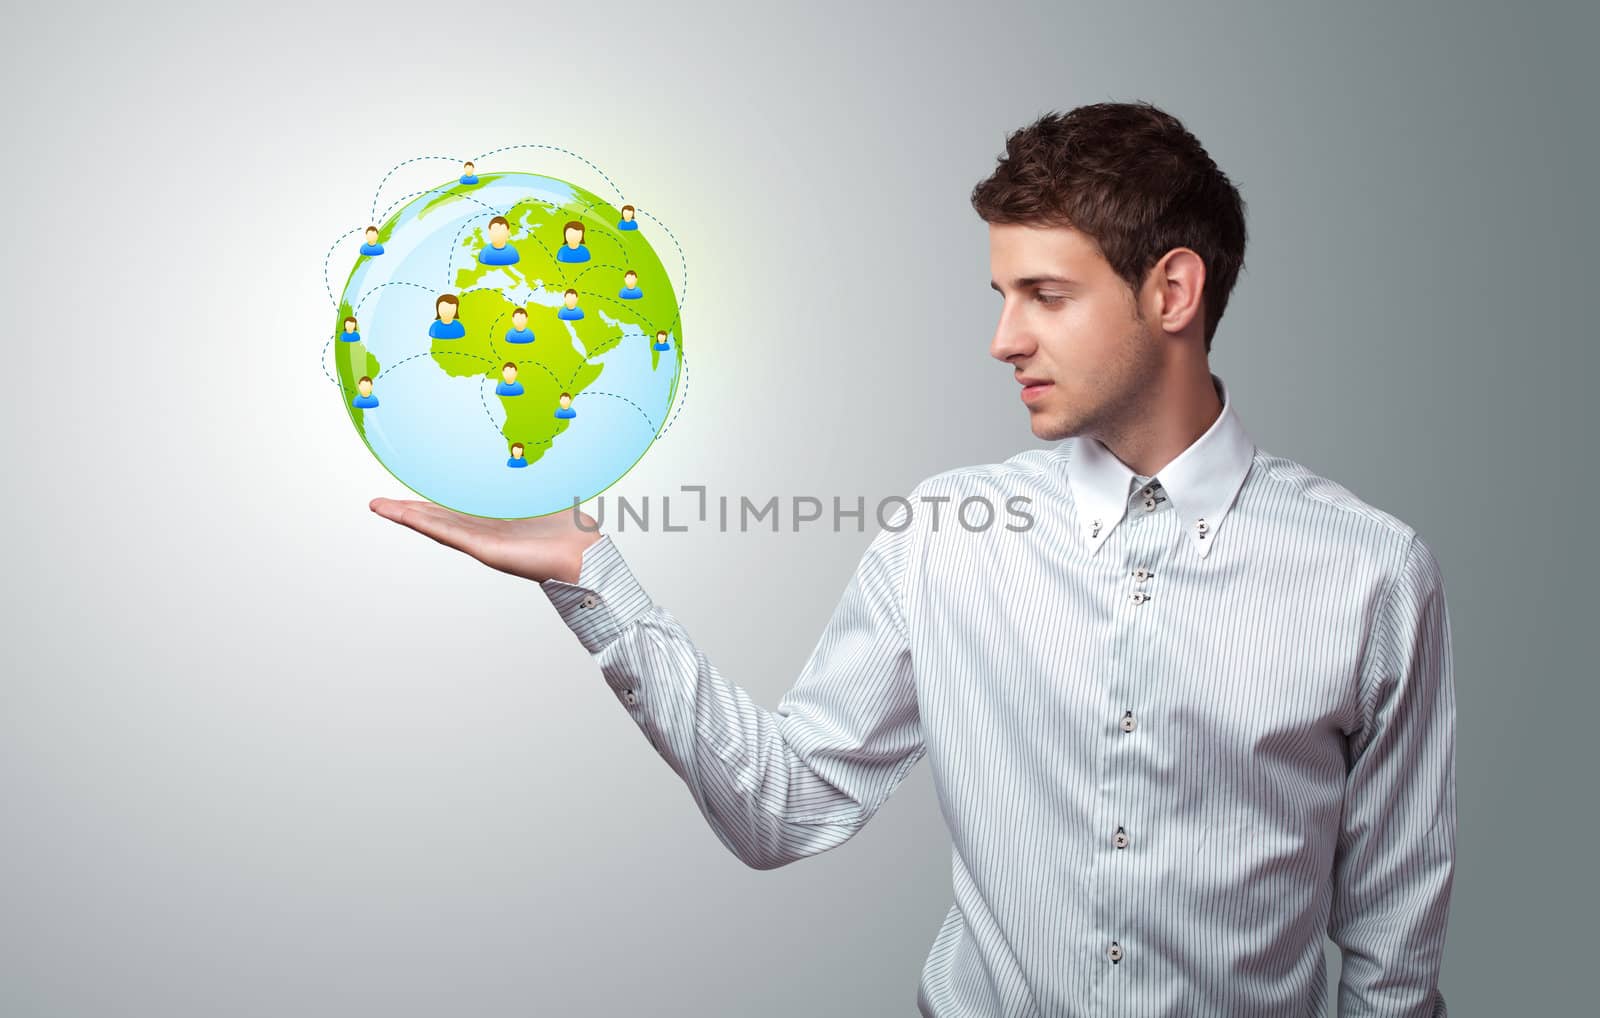 Young businessman holding virtual eco sign